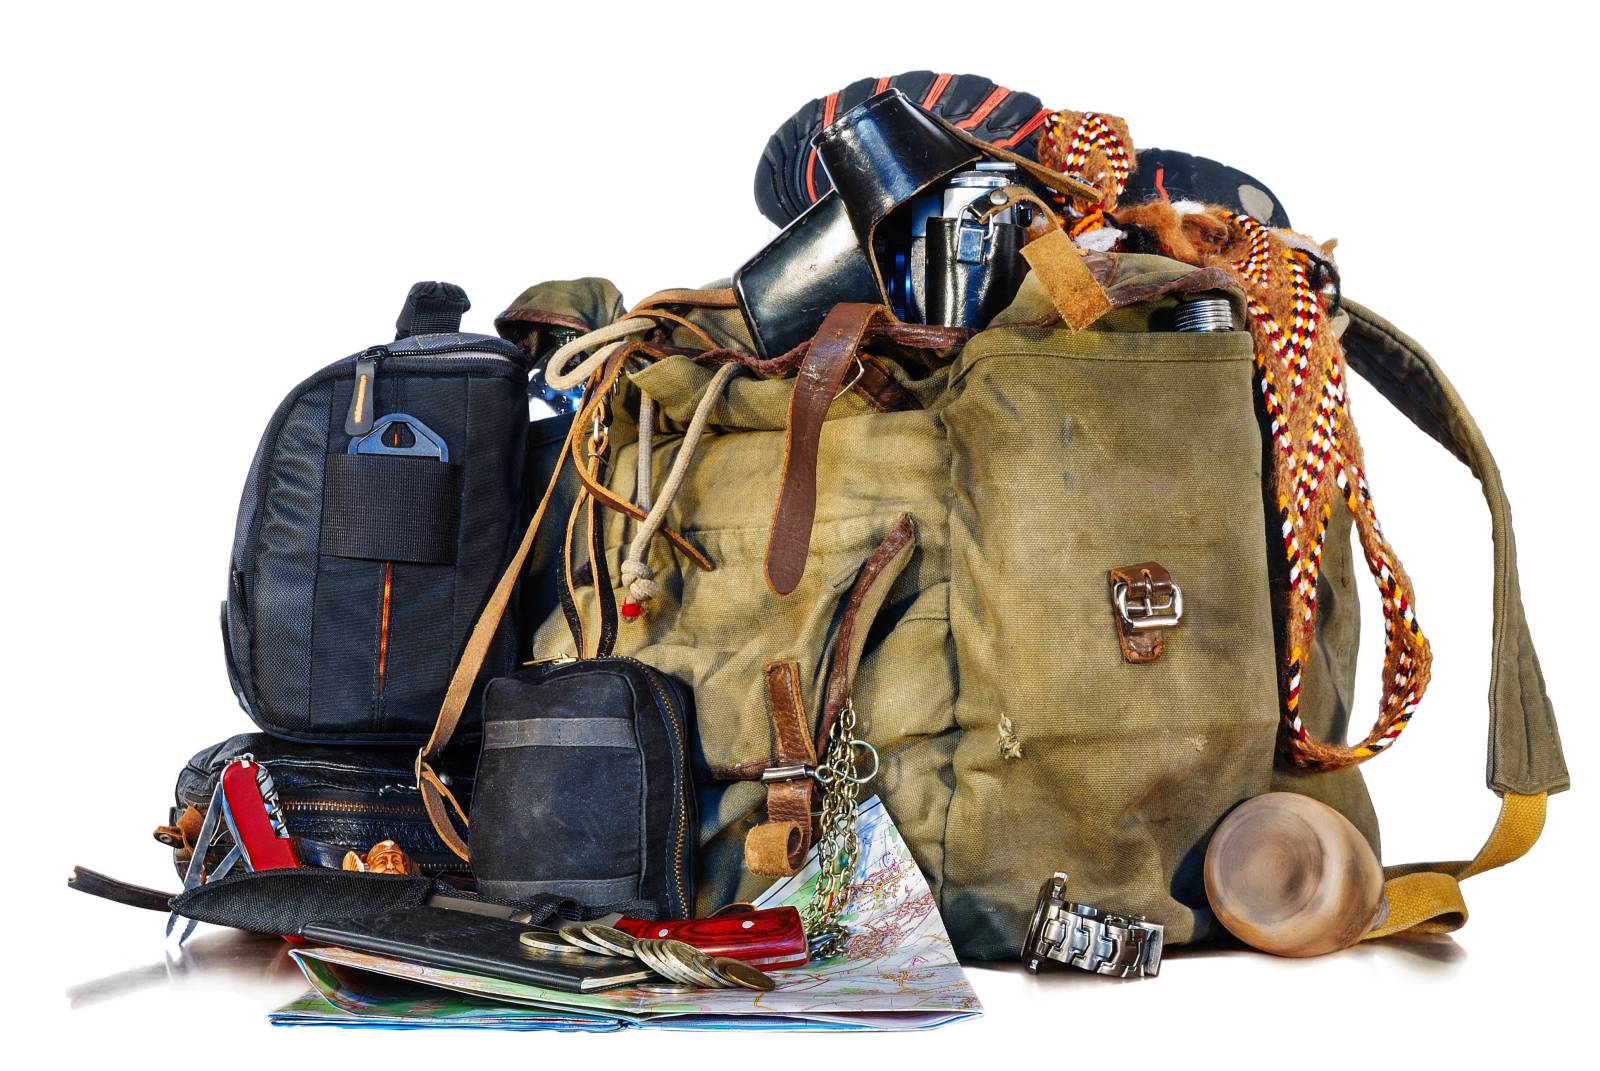 Bug Out Bag & Get Home Bags